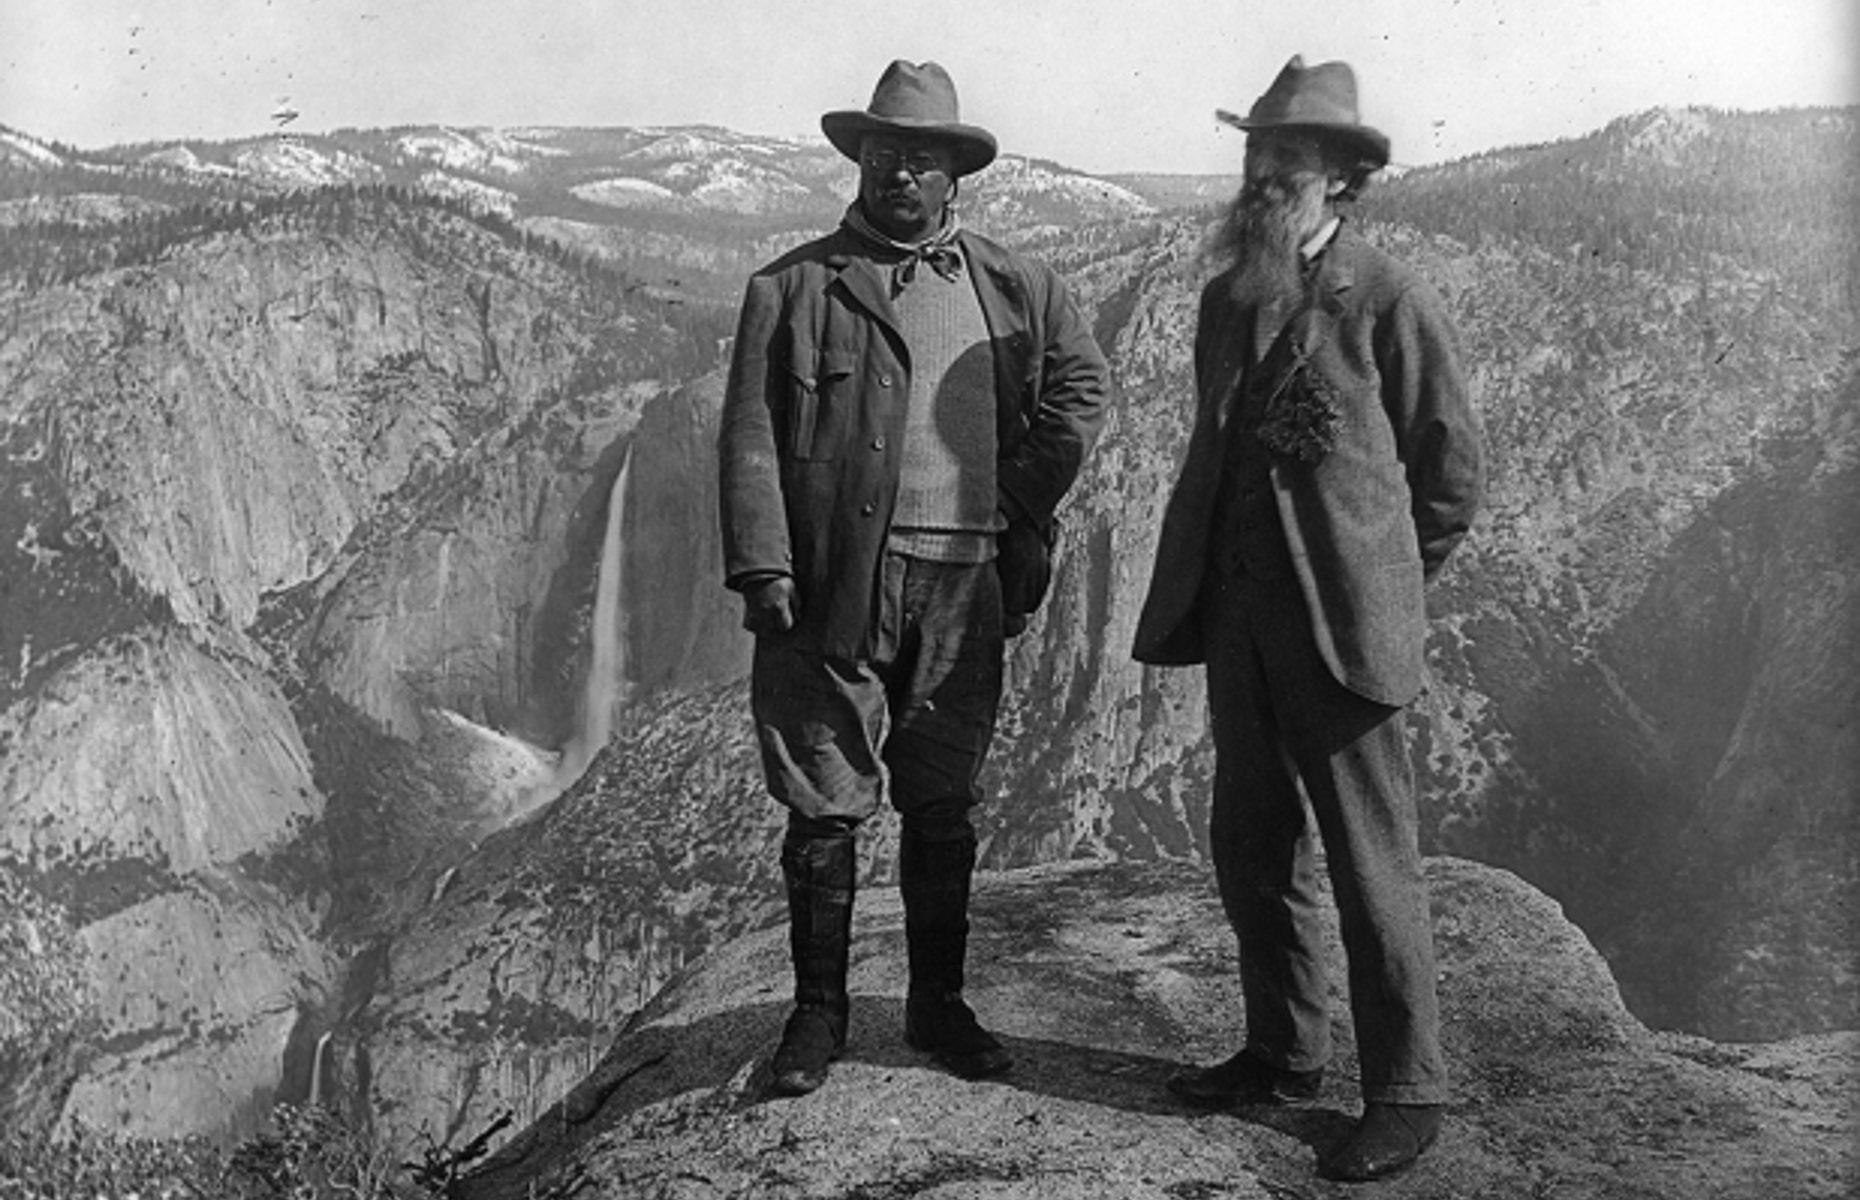 <p>In 1890, Congress allocated over 1,500 square miles of land (roughly the size of Rhode Island) for what would become Yosemite National Park. The state-controlled Yosemite Valley and Mariposa Grove were added to the park in 1906, after President Theodore Roosevelt traveled to California in 1903 and requested that John Muir join him on a camping trip. Roosevelt, having slept under the gargantuan sequoias of Mariposa Grove, echoed Muir’s sentiments and compared the experience to "lying in a great solemn cathedral."</p>